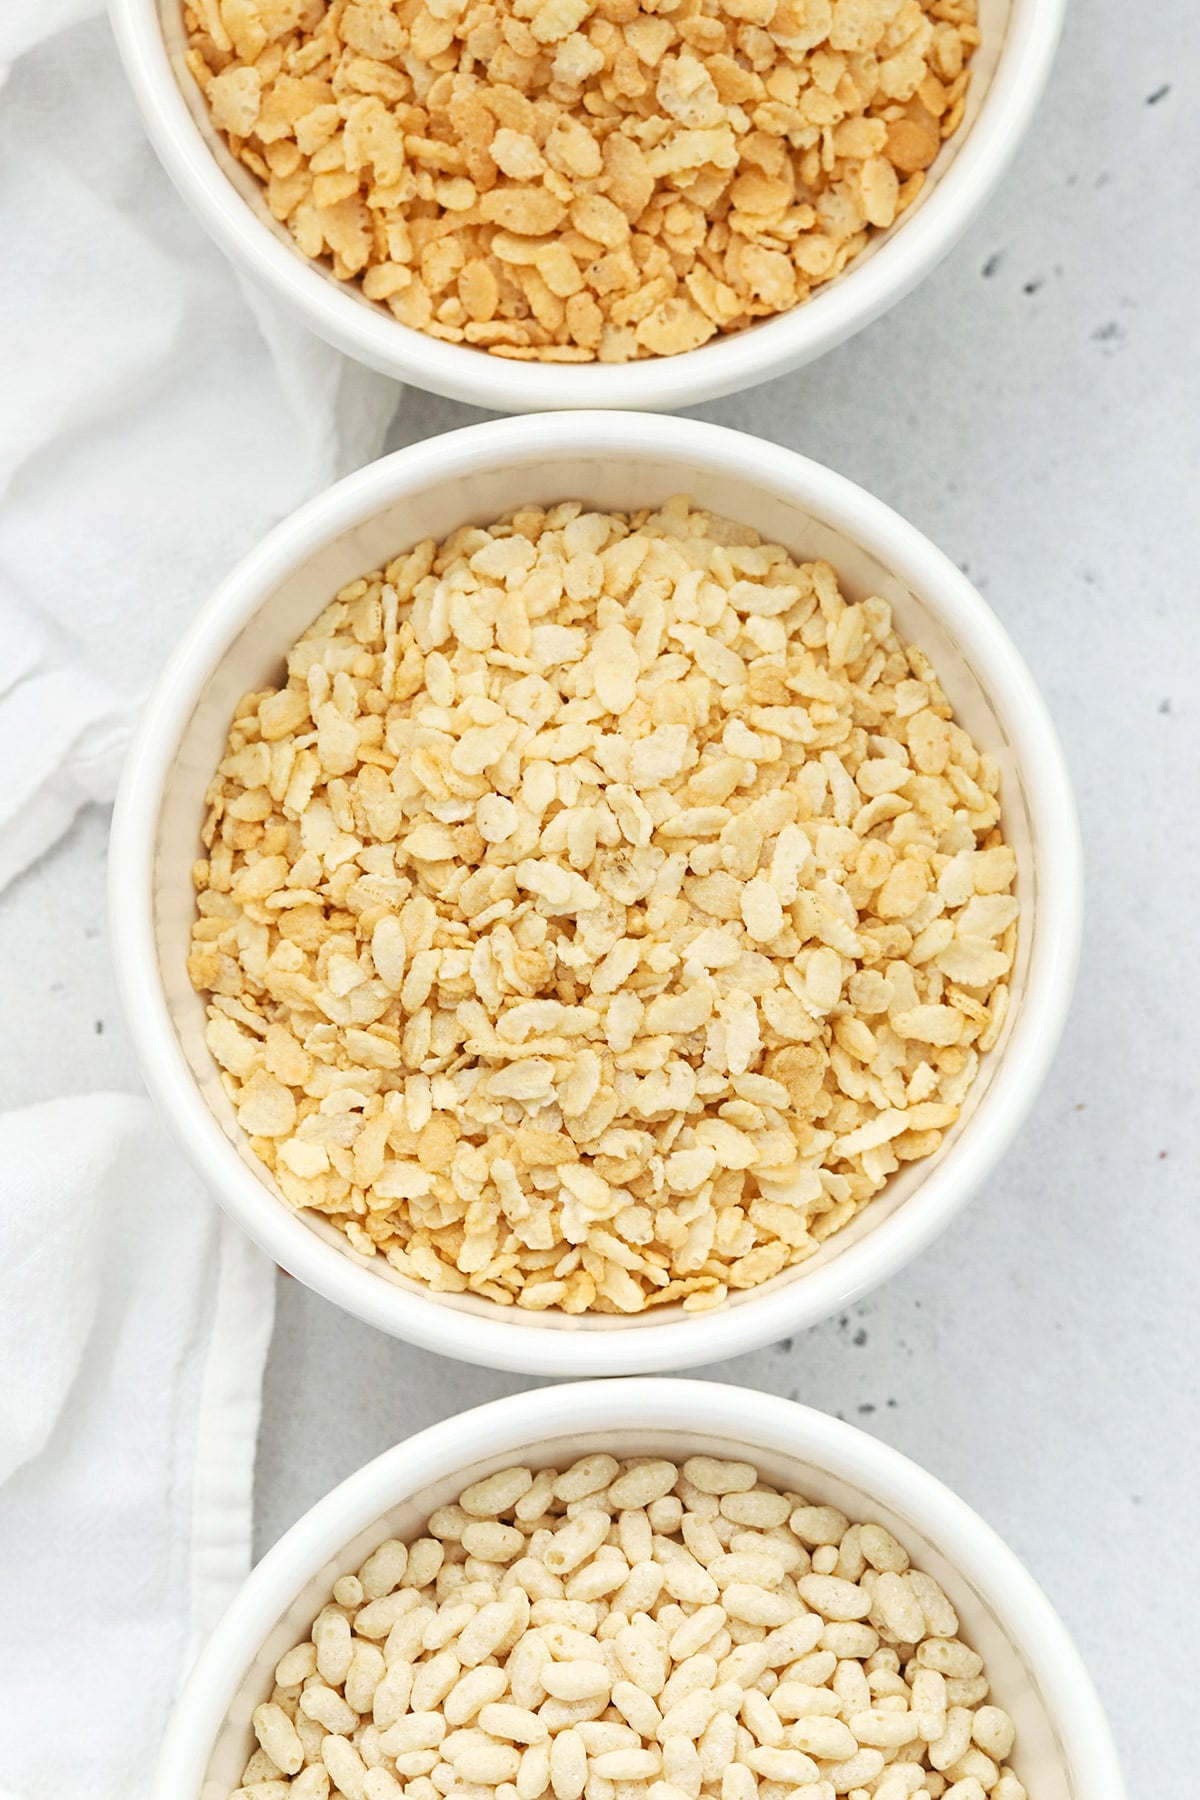 Overhead view of three bowls of gluten-free rice krispies cereals